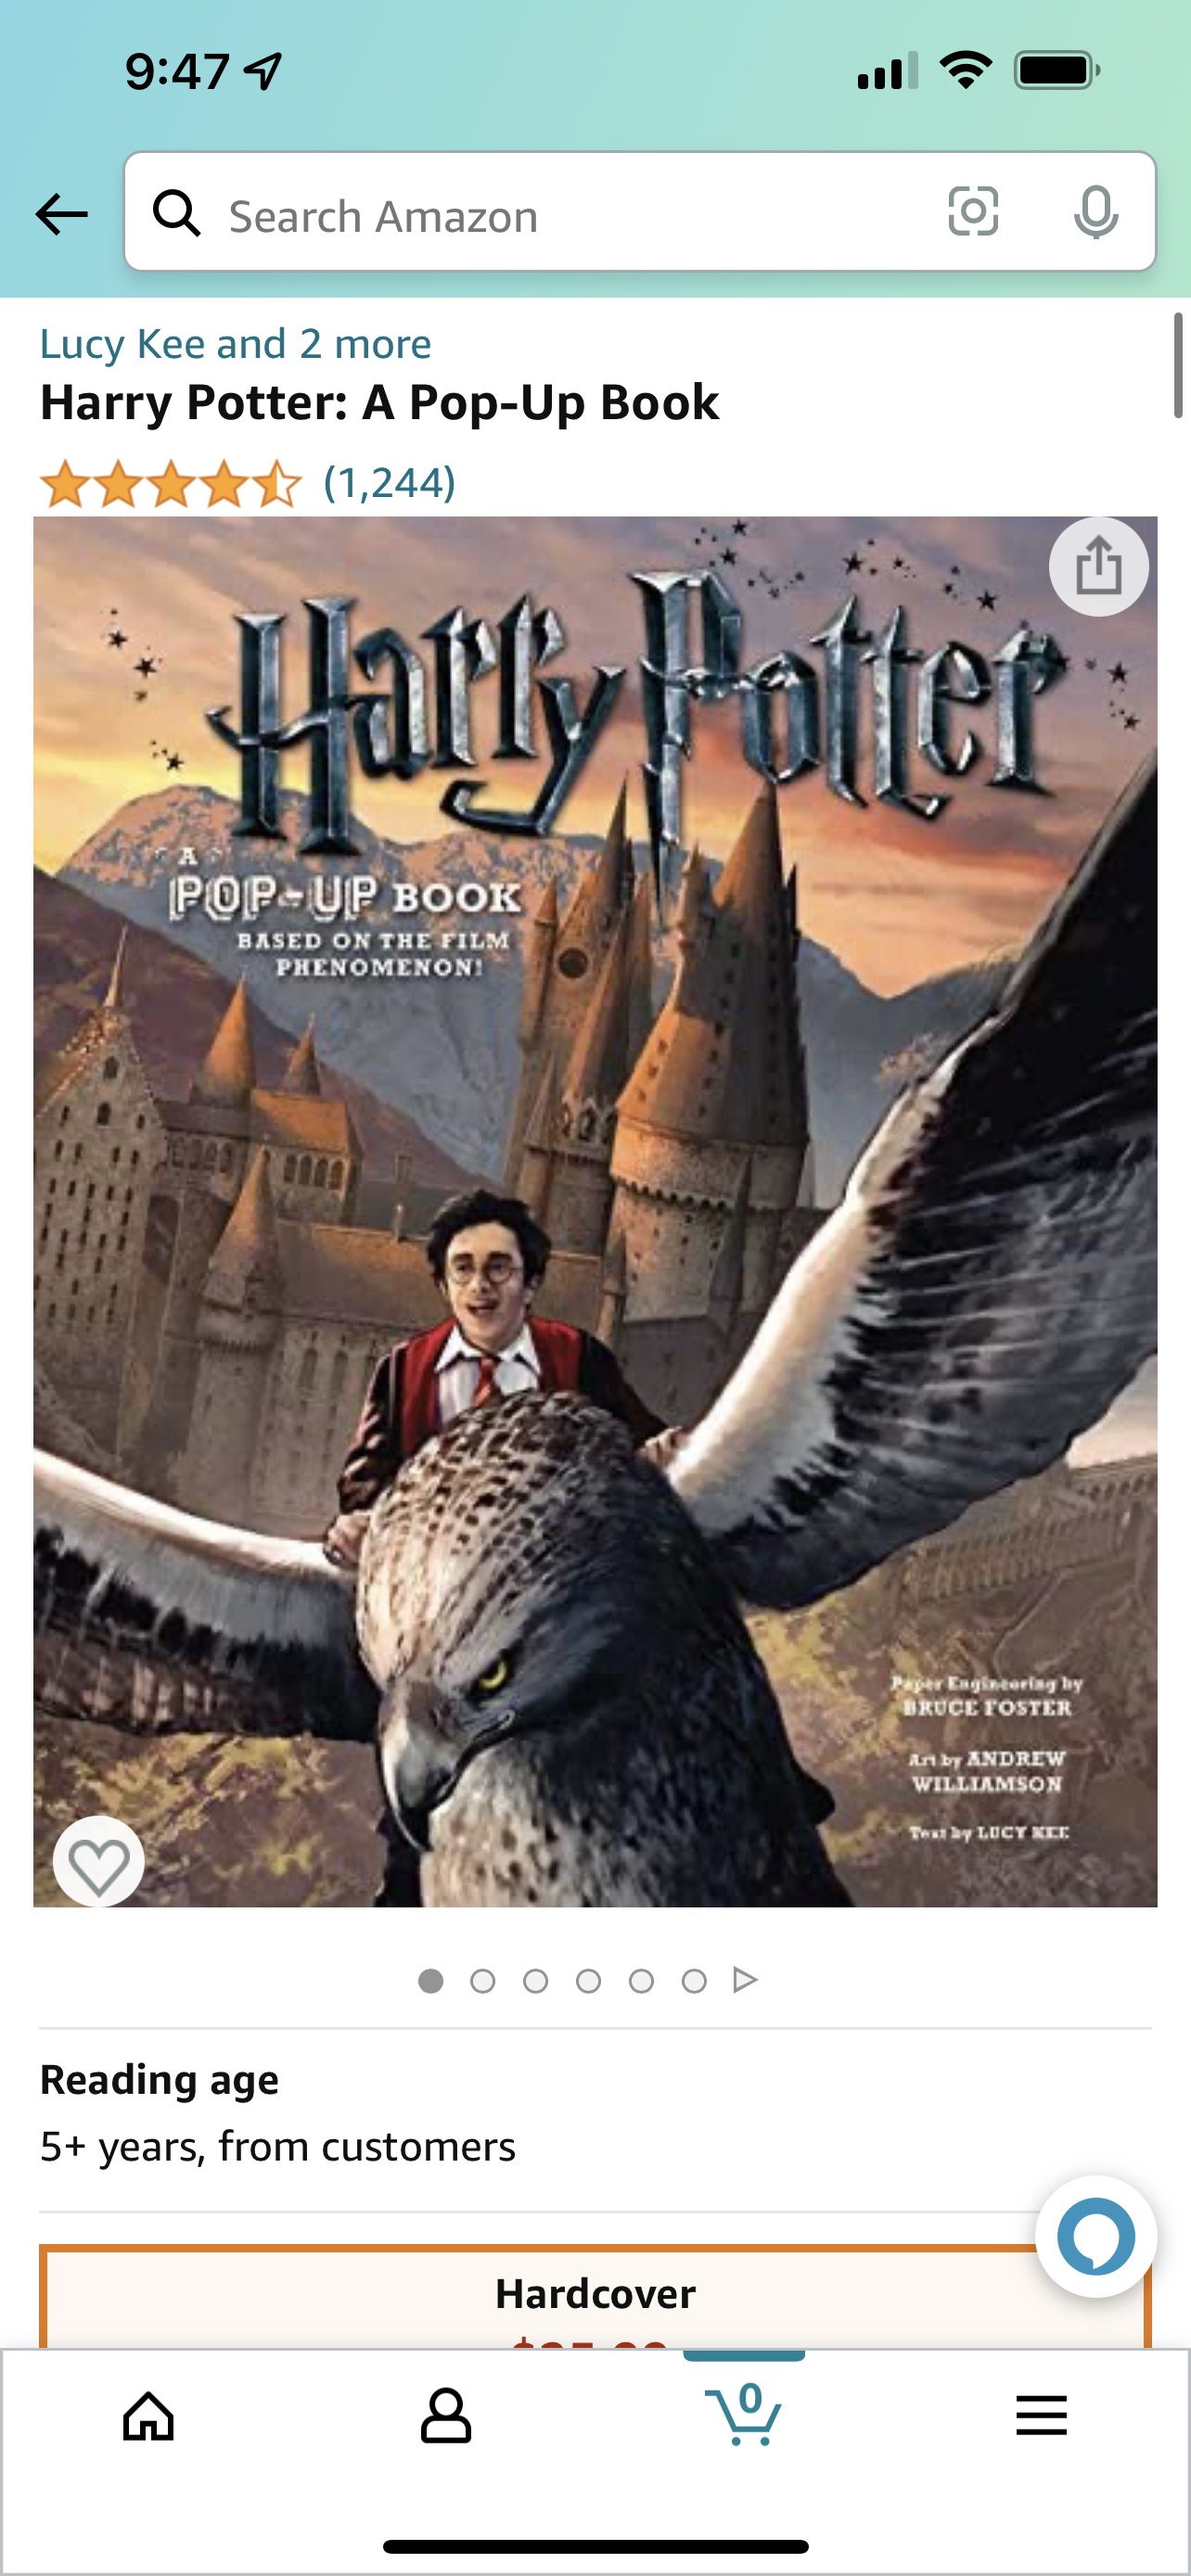 Amazon.com: Harry Potter: A Pop-Up Book: 0884245005064: Lucy Kee, Bruce Foster, Andrew Williamson: Books